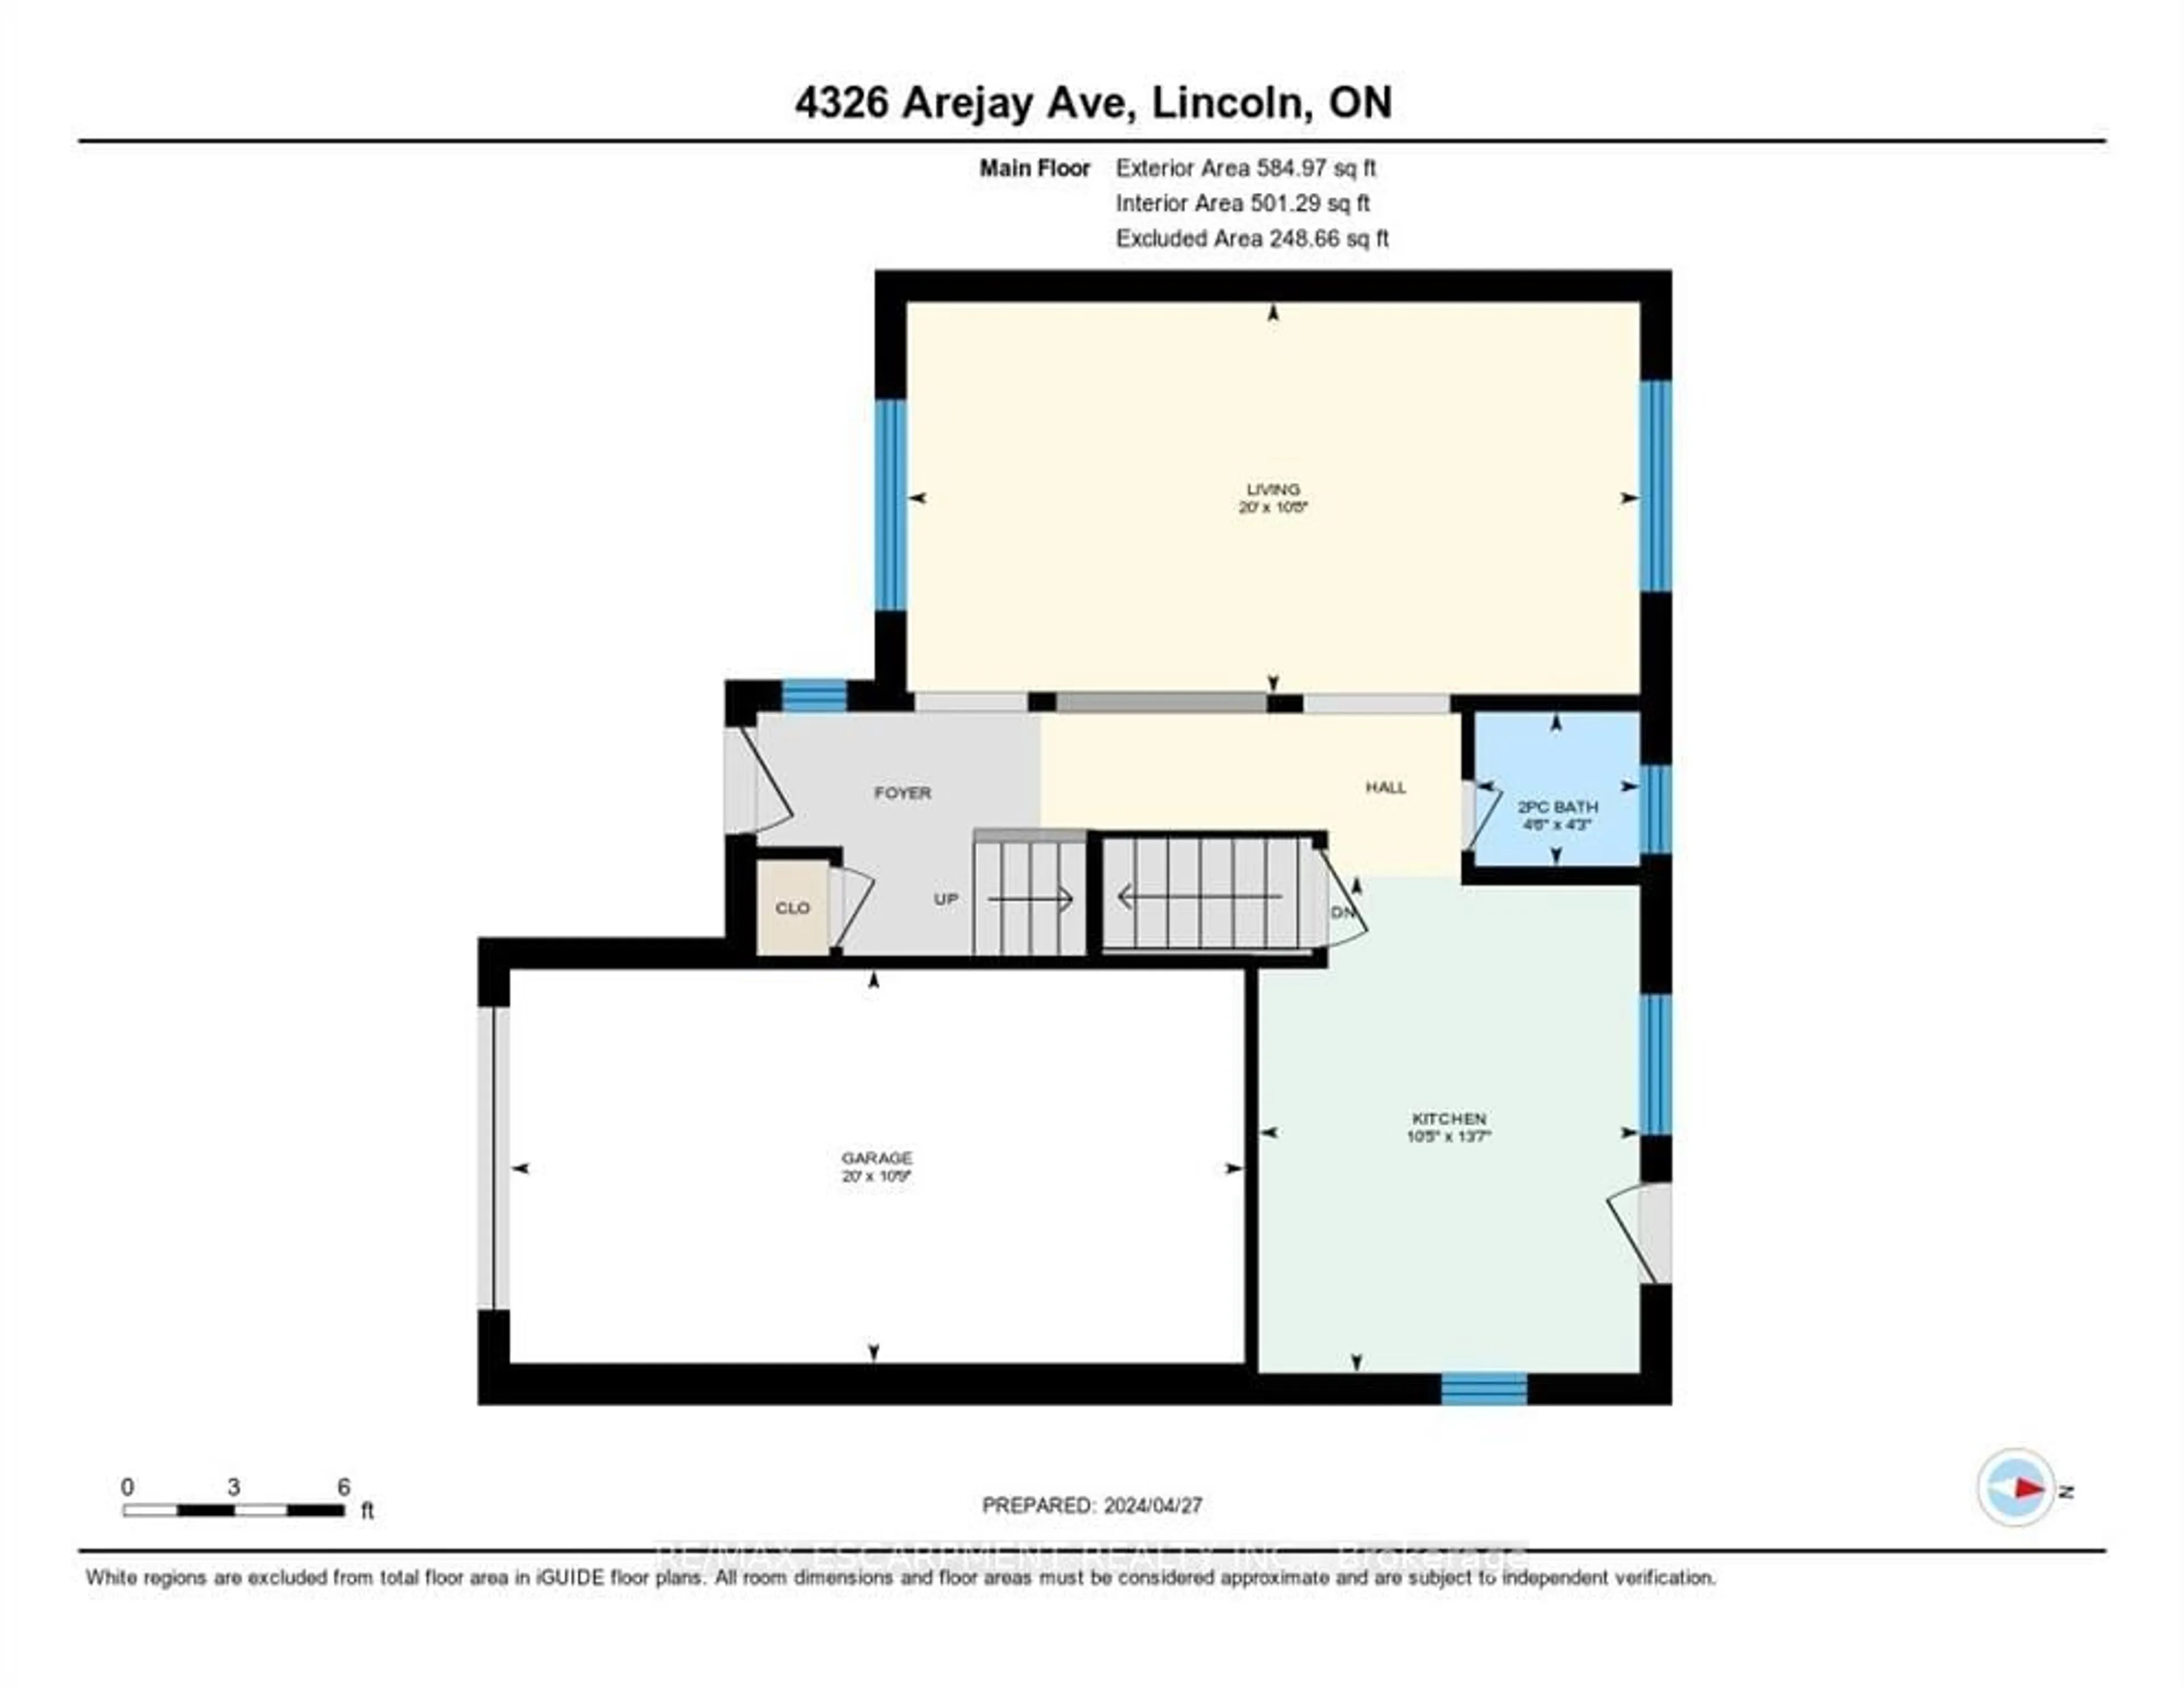 Floor plan for 4326 Arejay Ave, Lincoln Ontario L3J 0P7